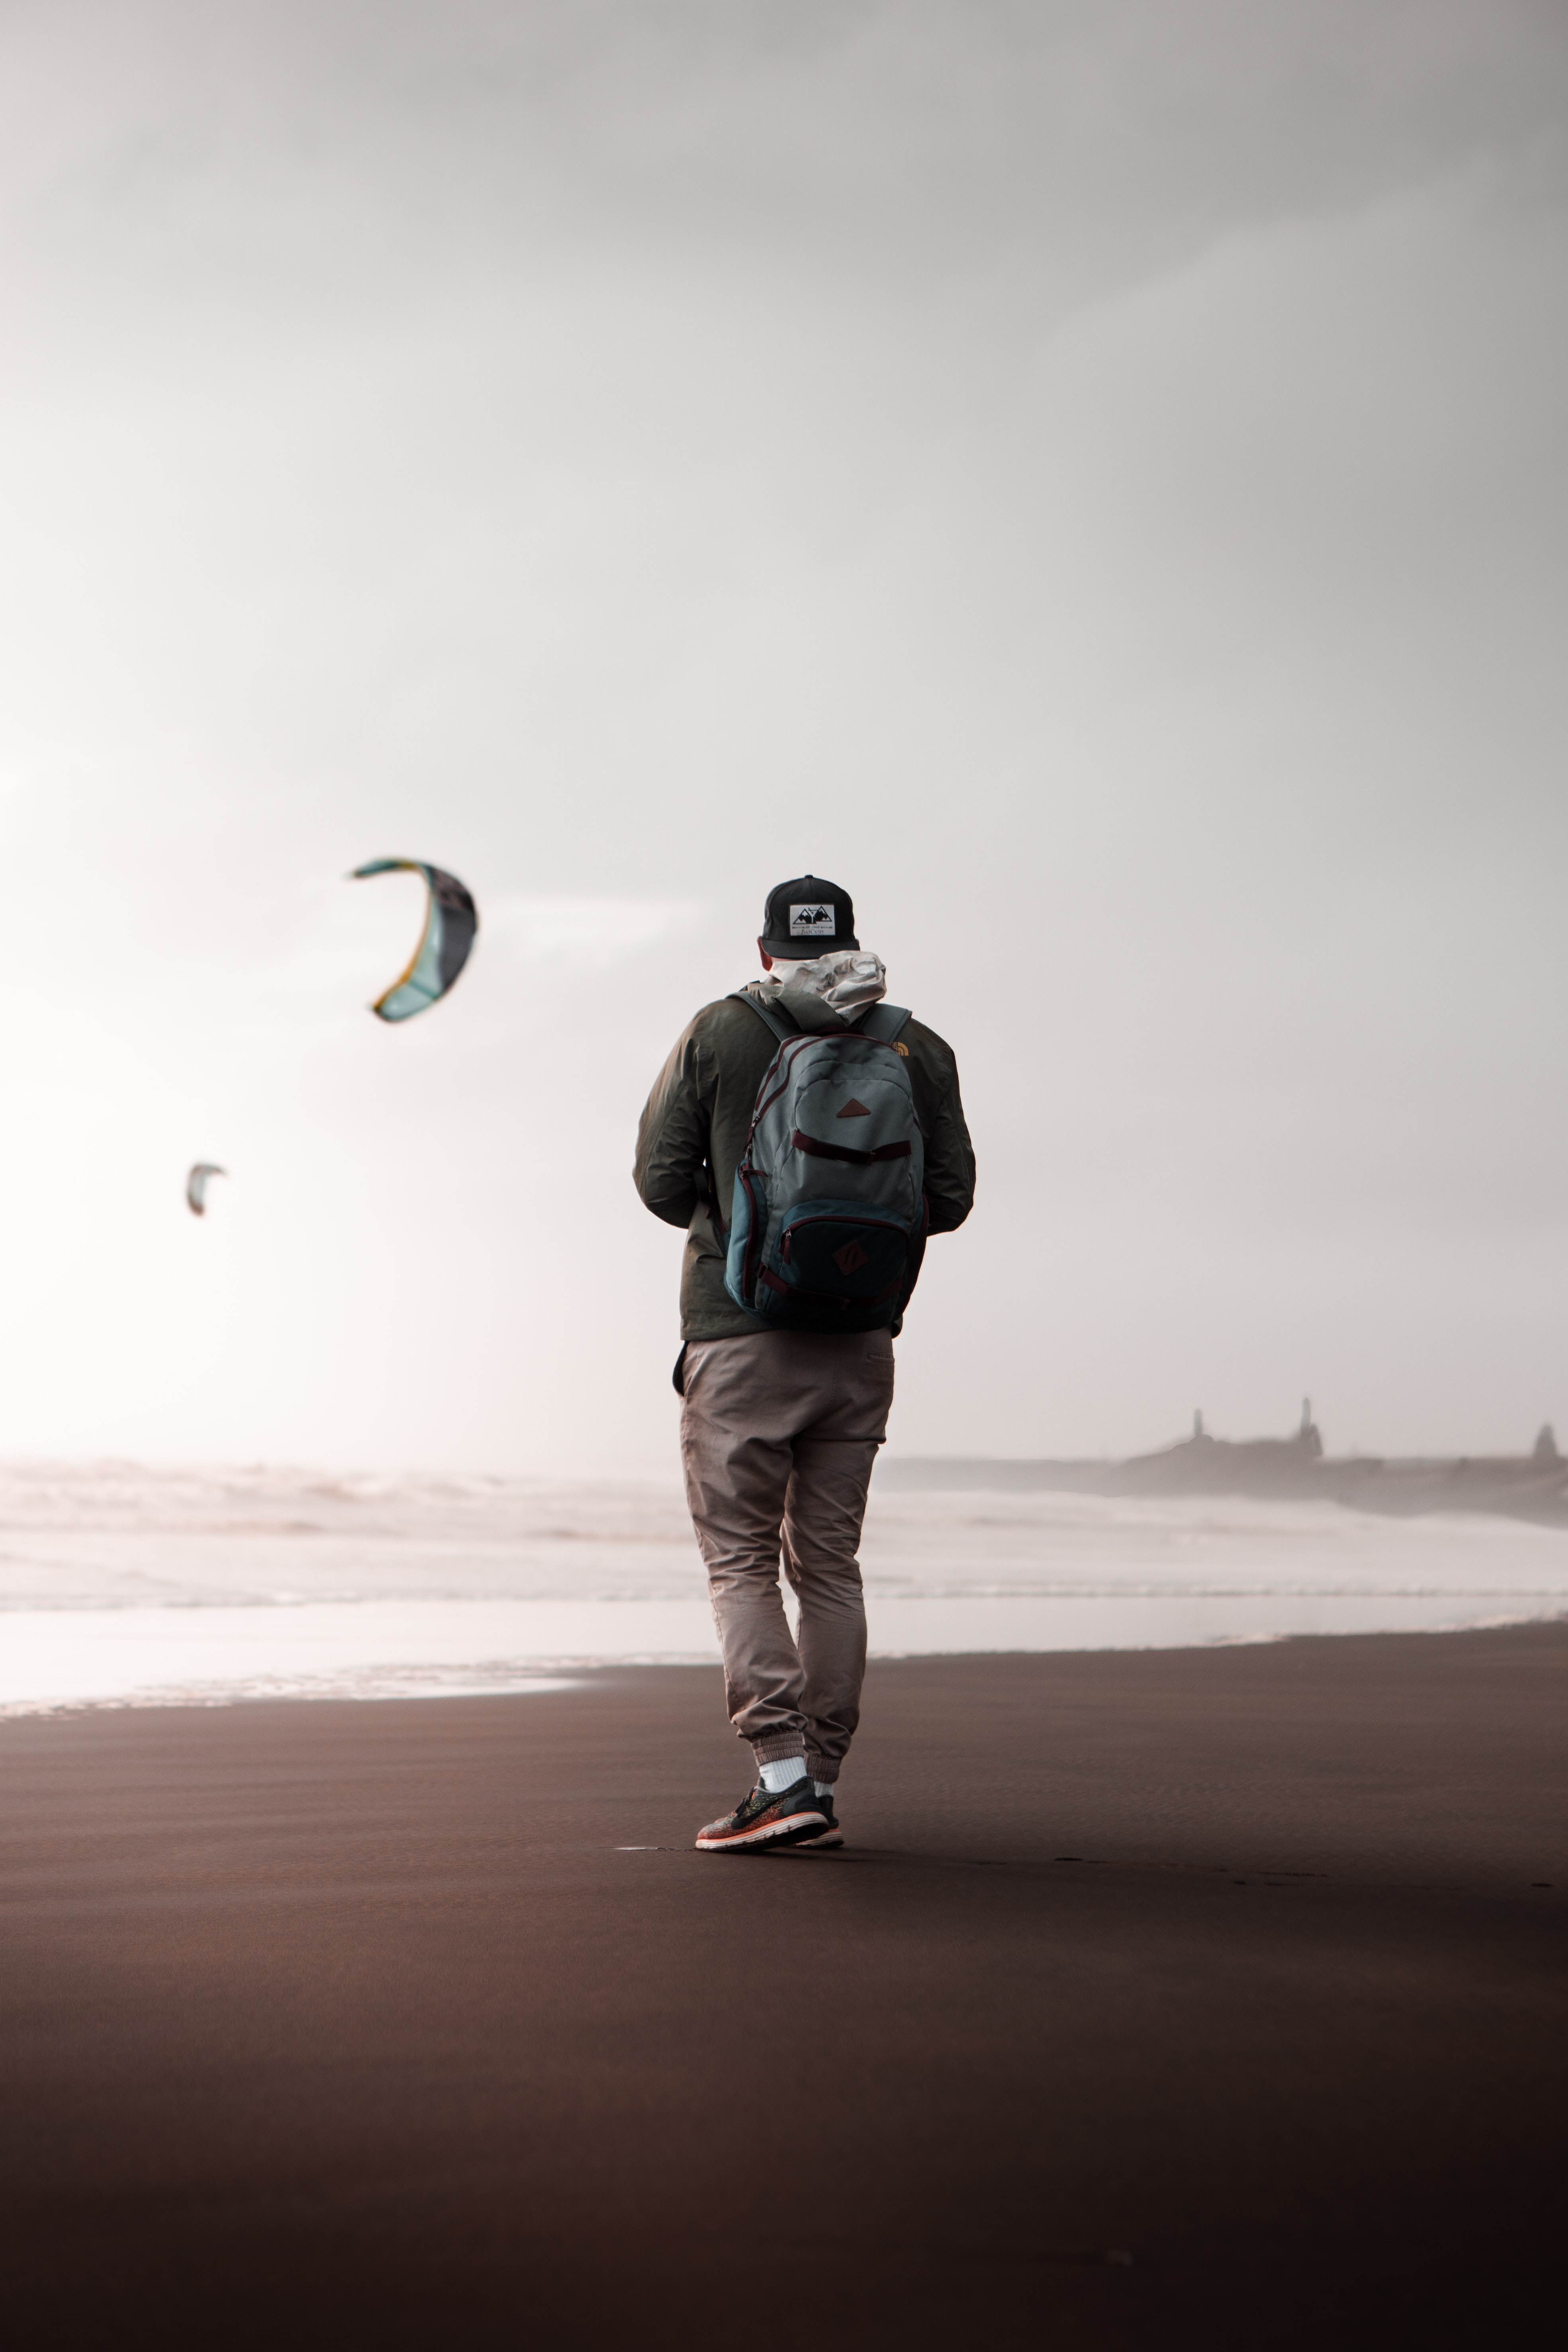 miscellanea, alone, lonely, coast, miscellaneous, style, human, person, loneliness, paragliders Phone Background